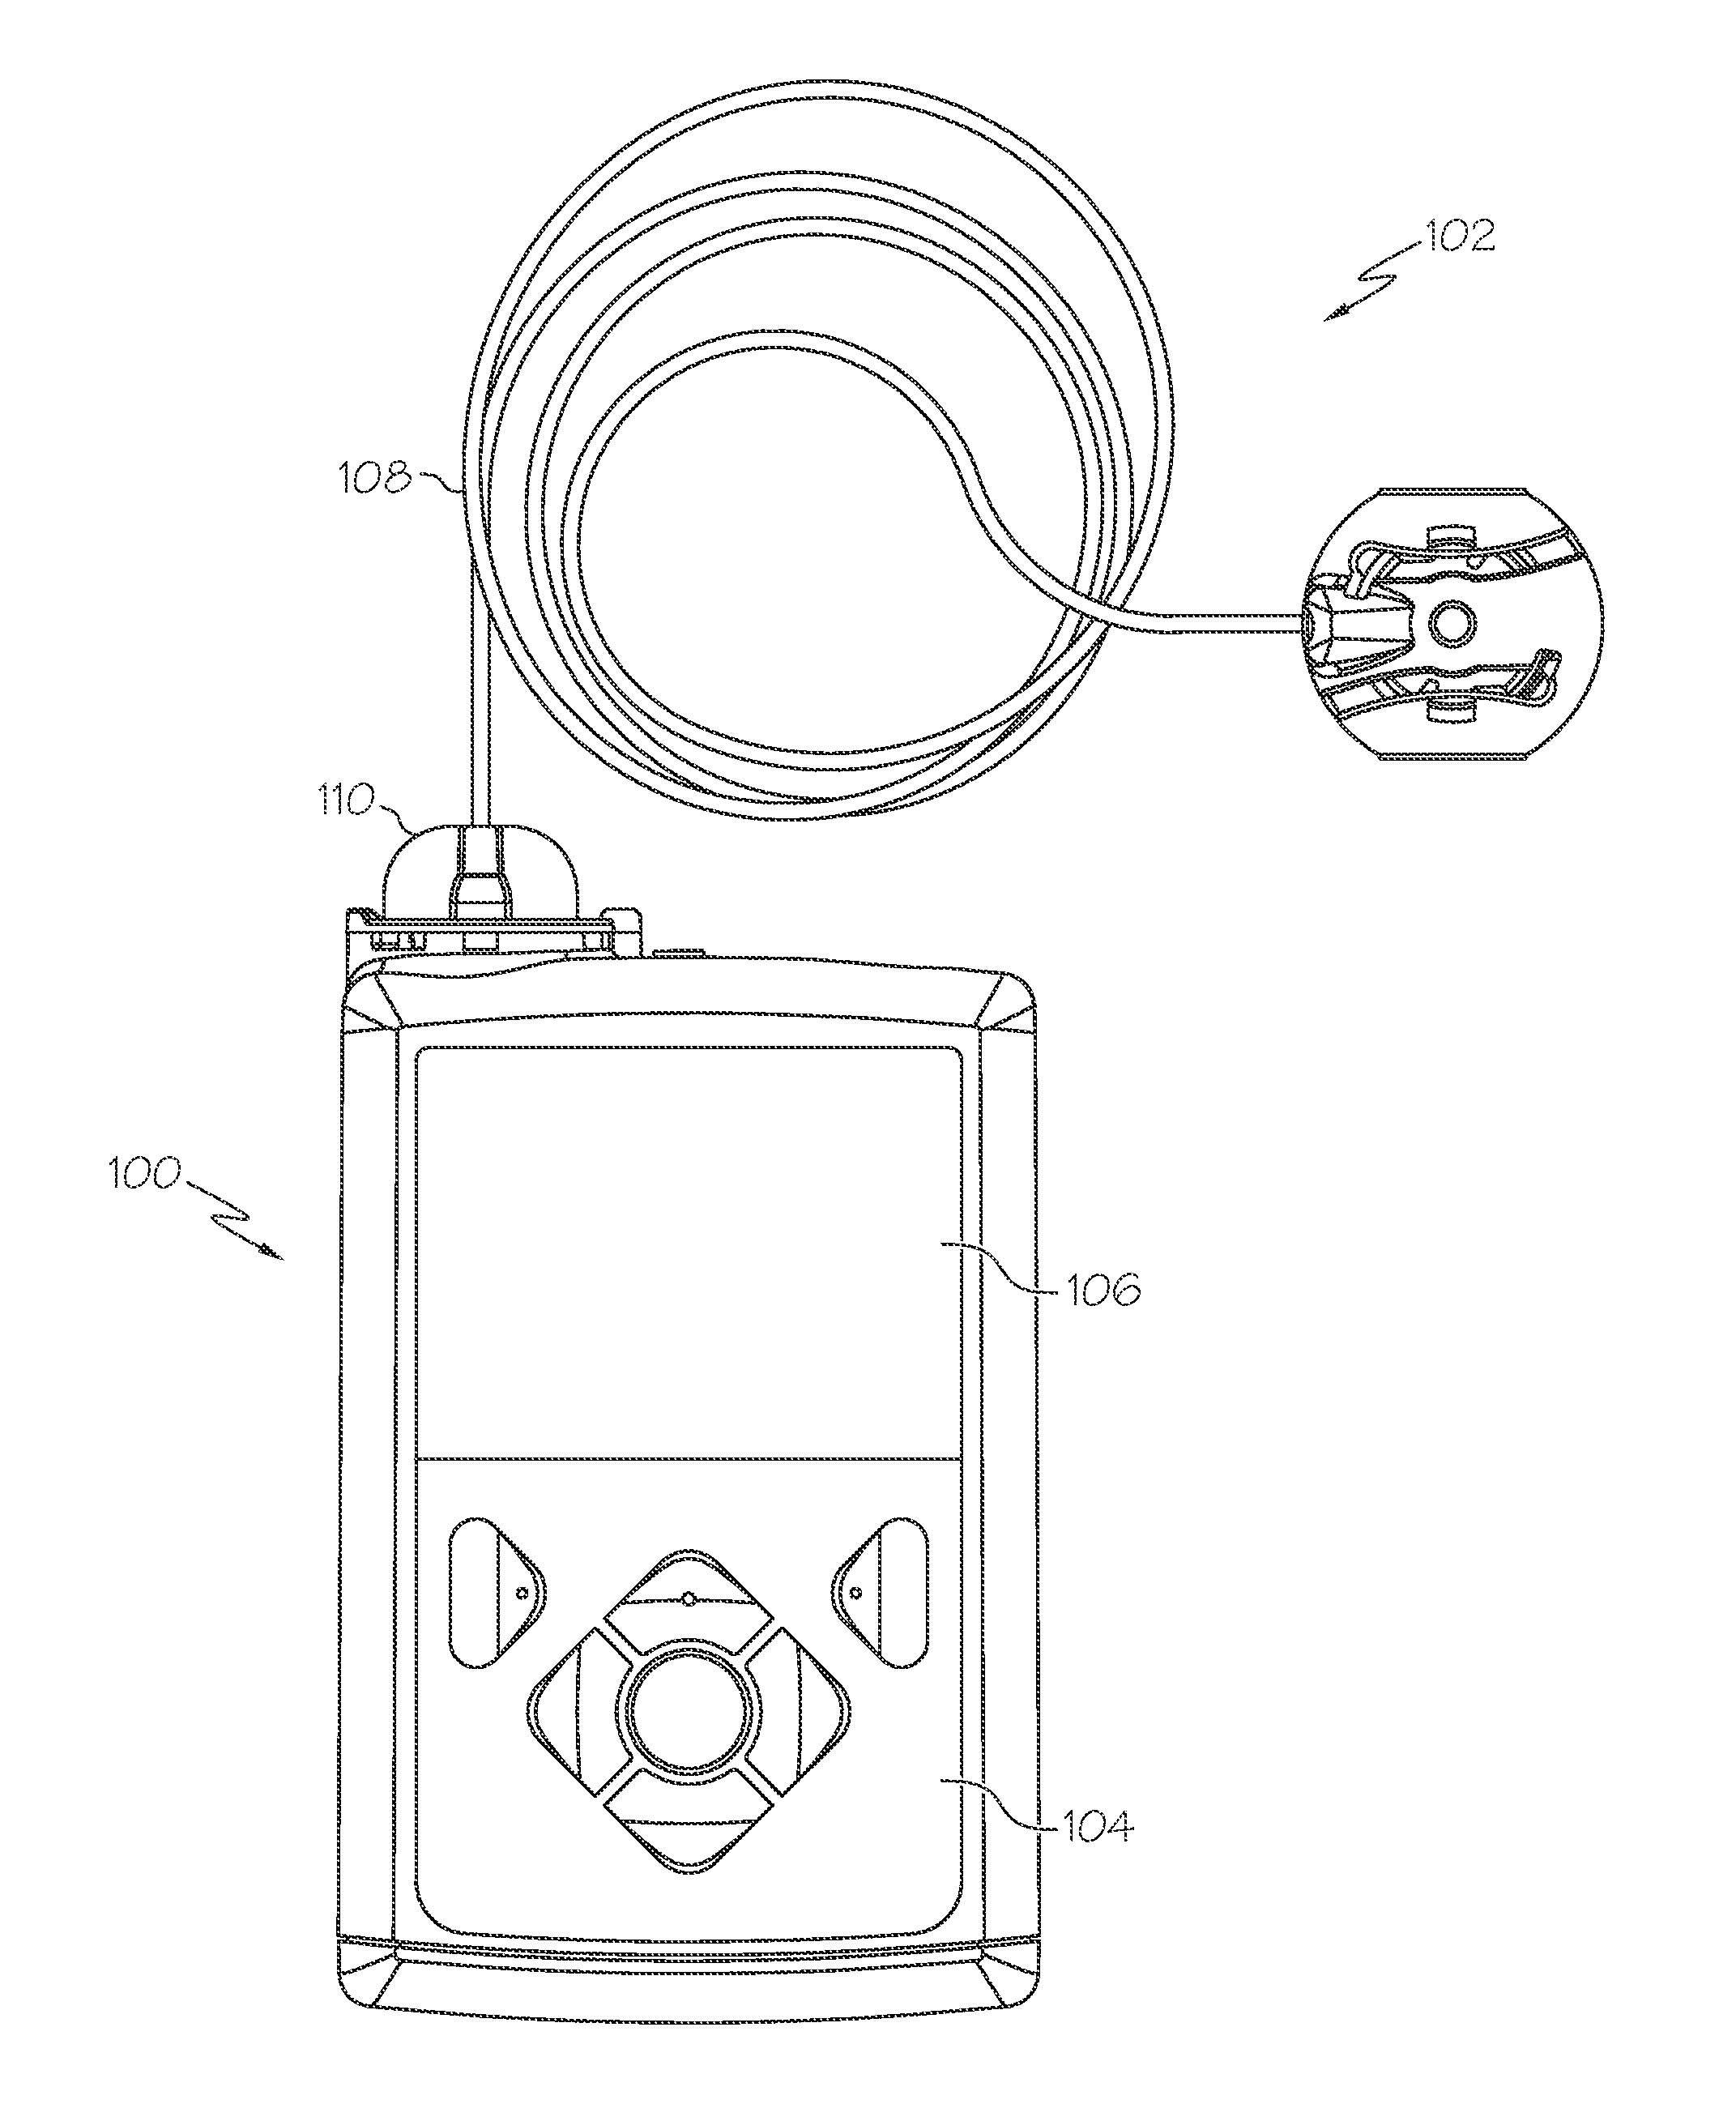 Occlusion detection for a fluid infusion device